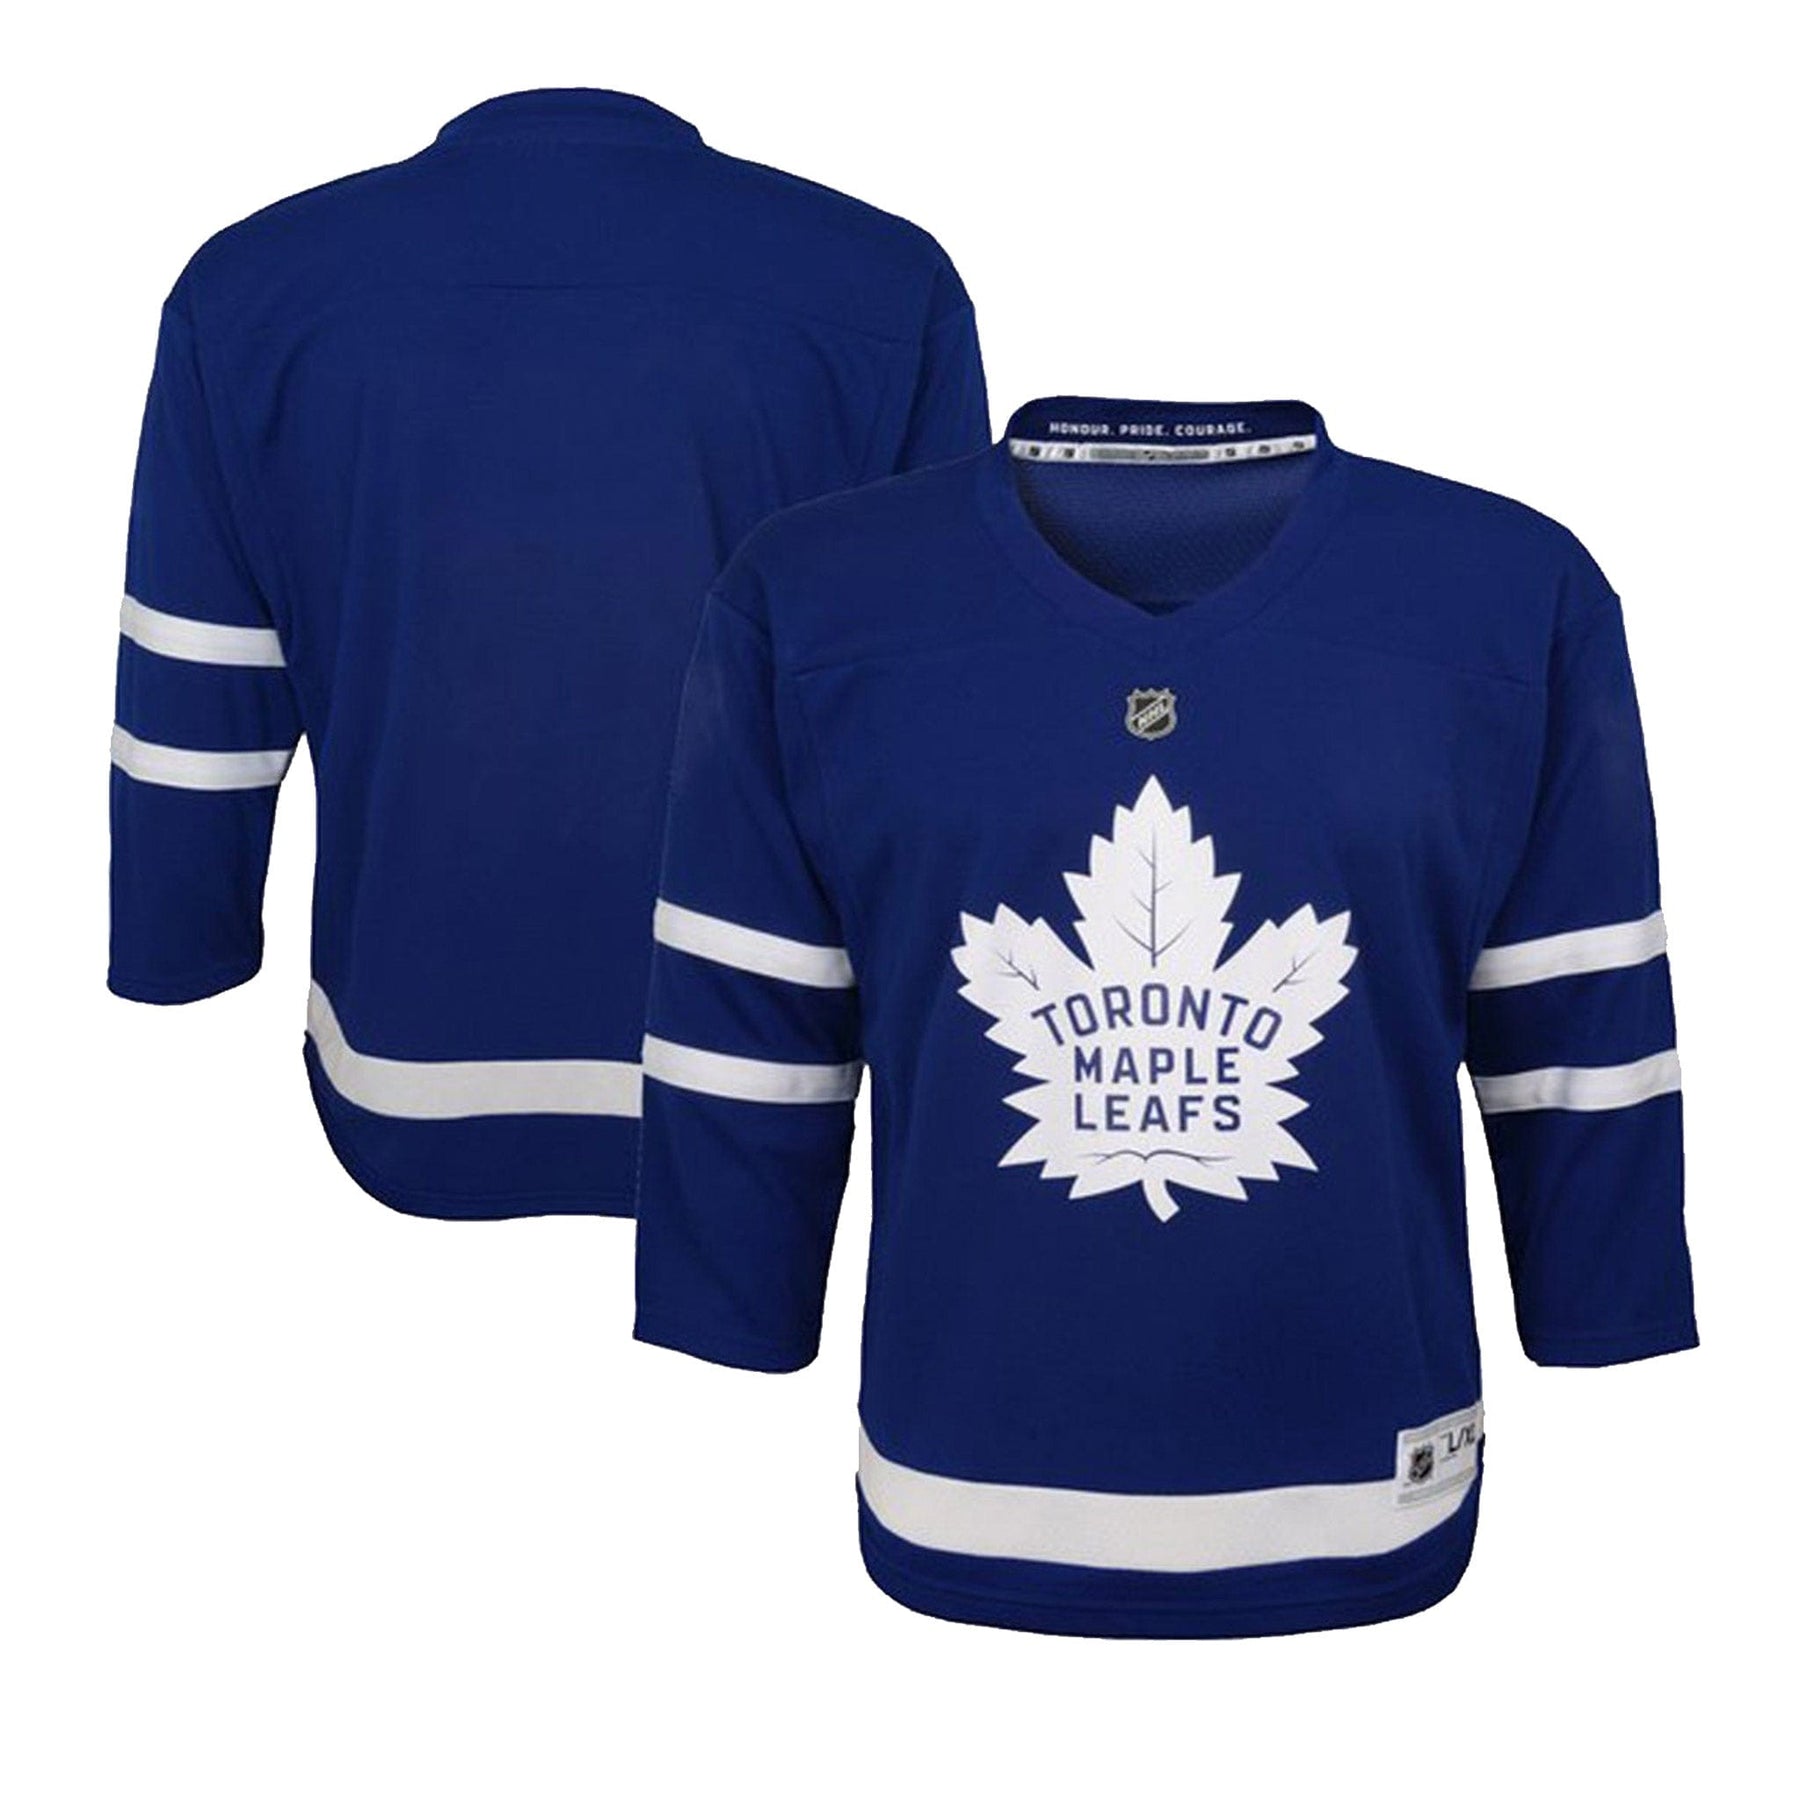 Toronto Maple Leafs Home Outer Stuff Replica Infant Jersey